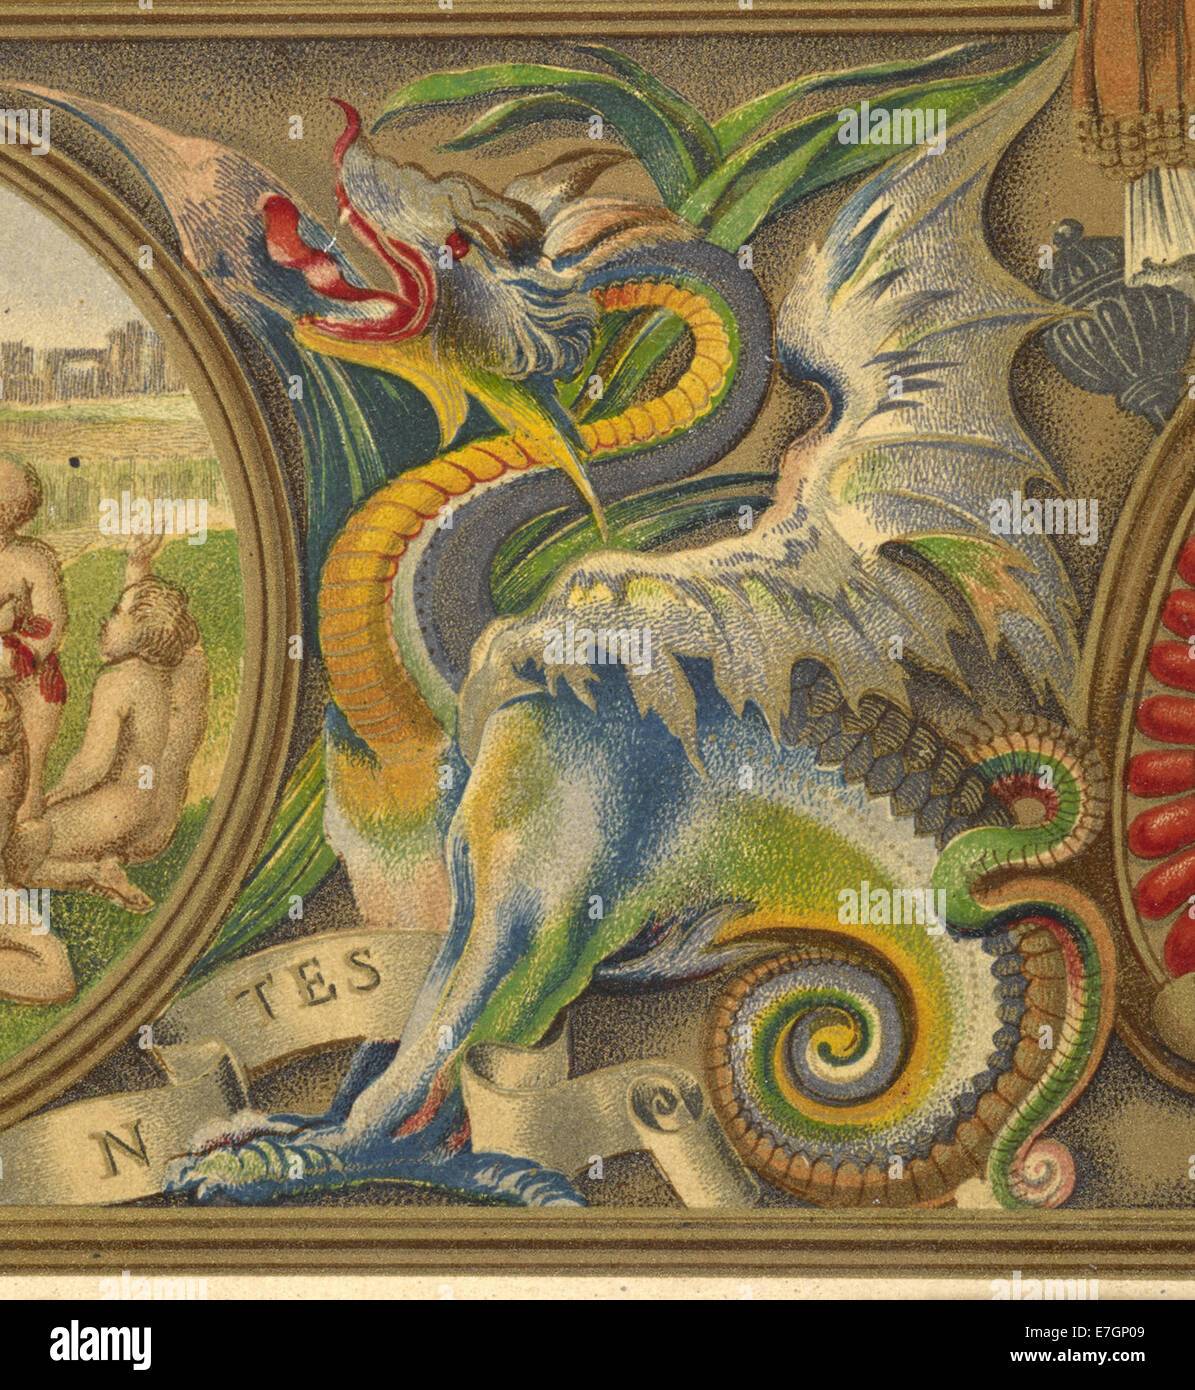 A dragon - The Illuminated Books of the middle ages (1844-1849) - BL Stock Photo